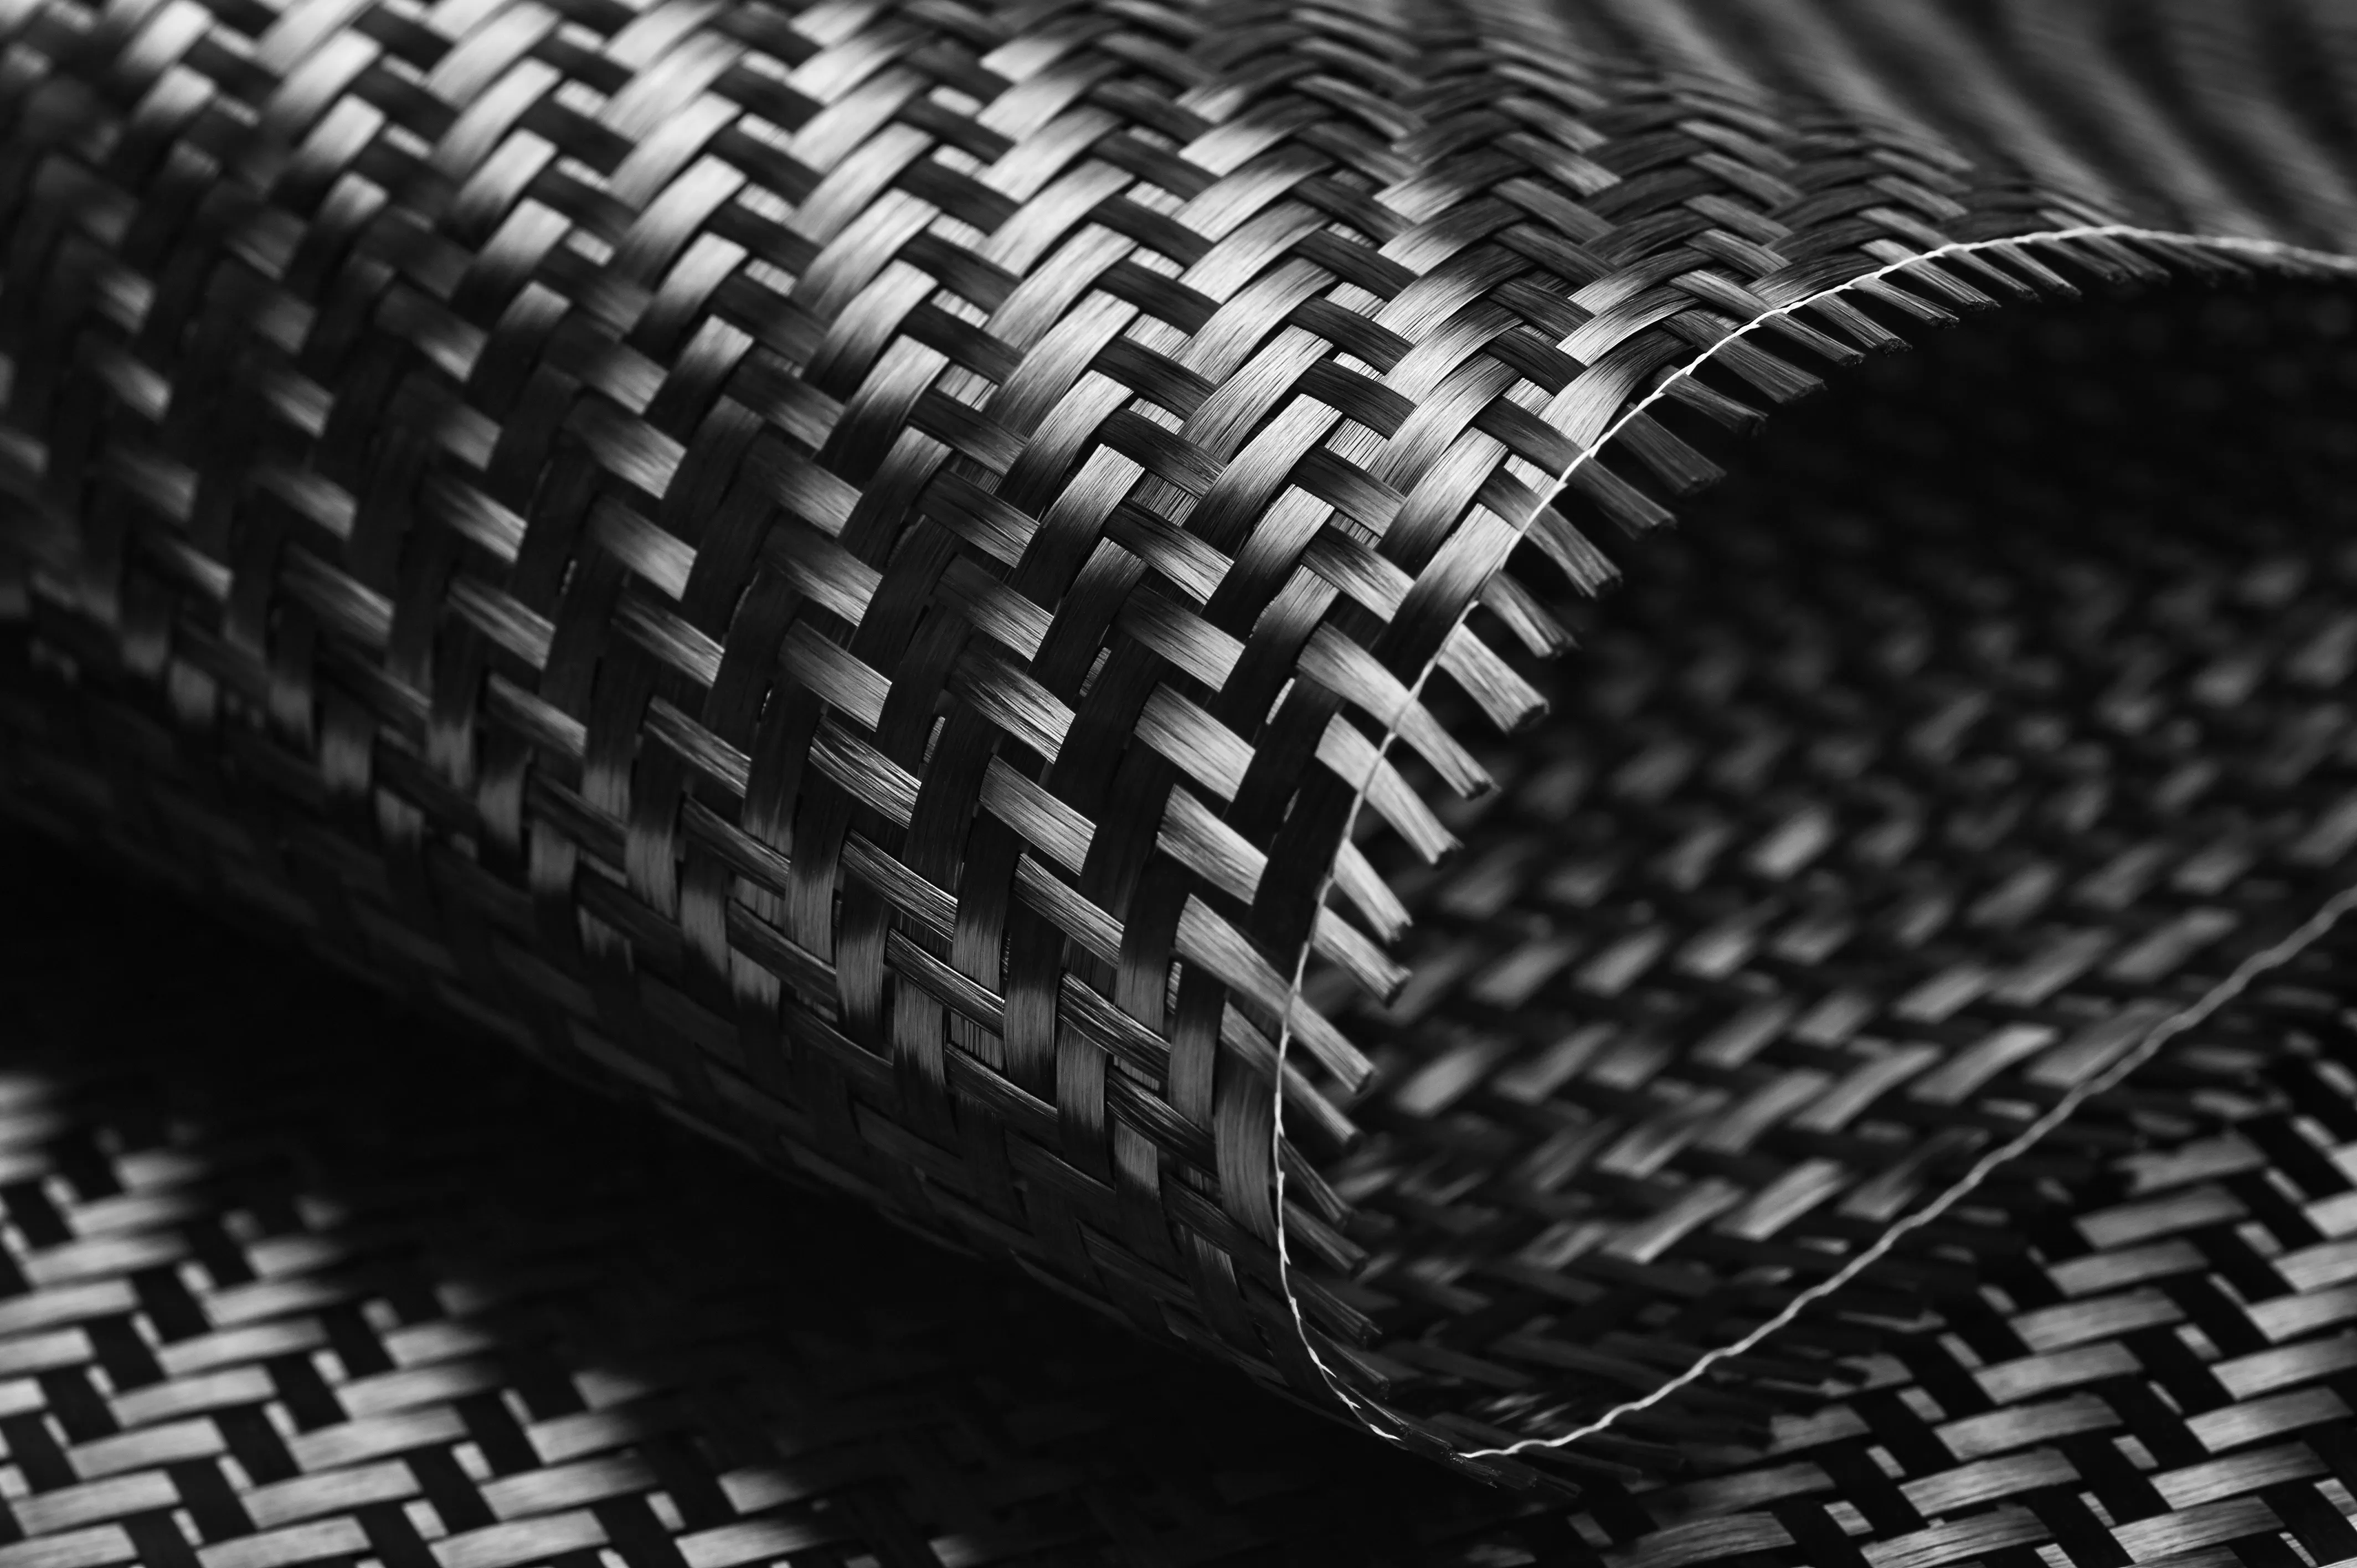 Image of some composite materials